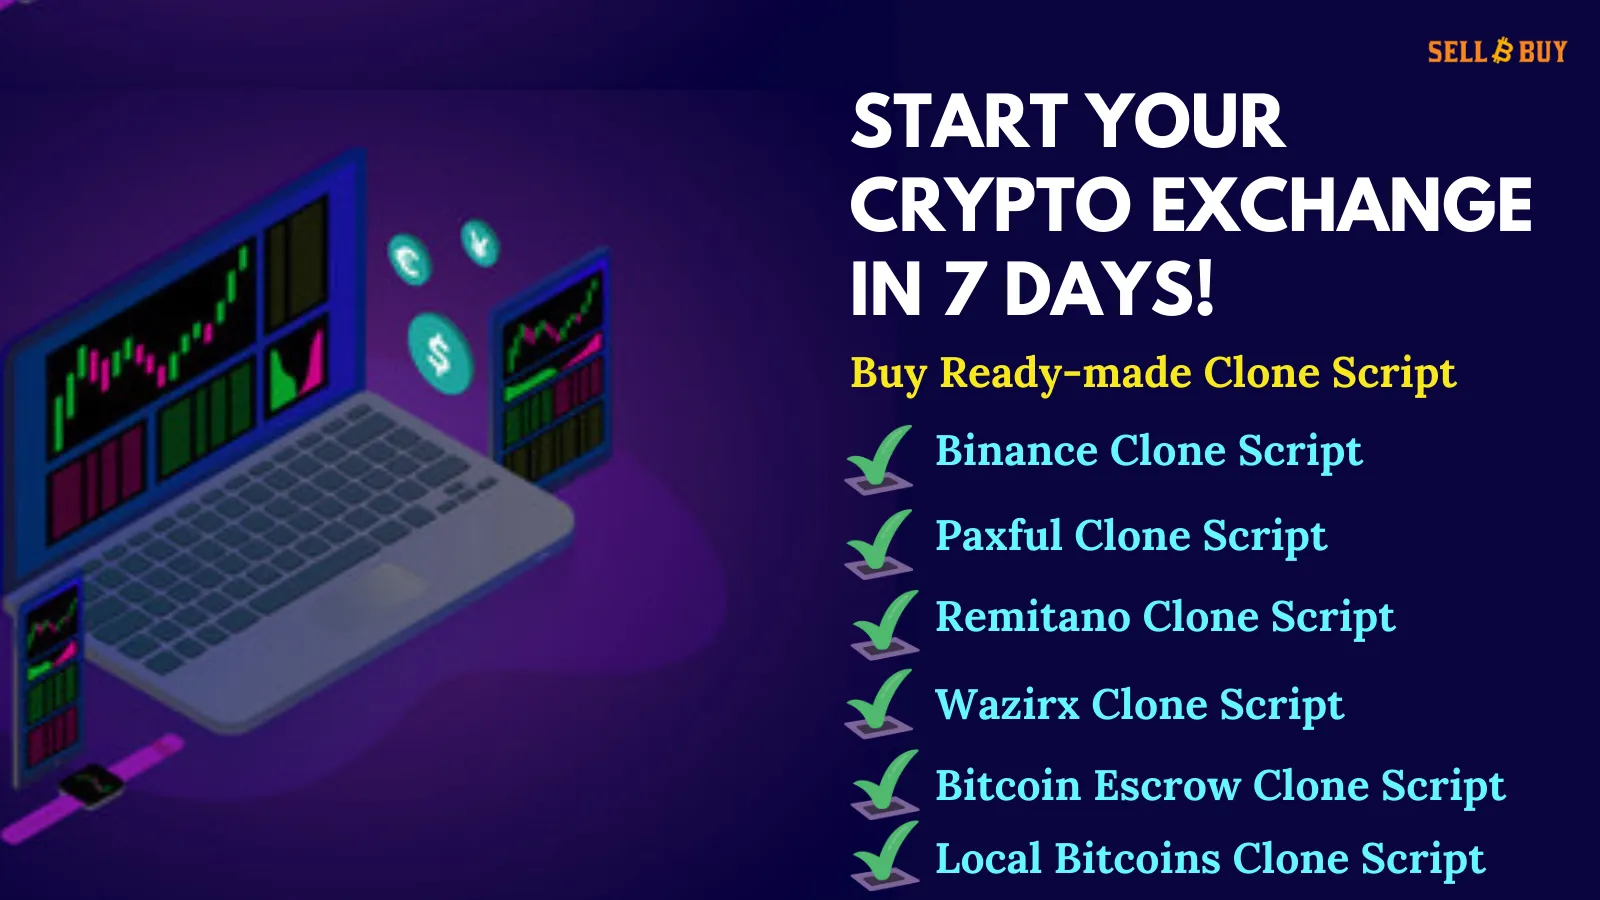 Get Inevitable business growth | Start Your Crypto Exchange Platform Now!